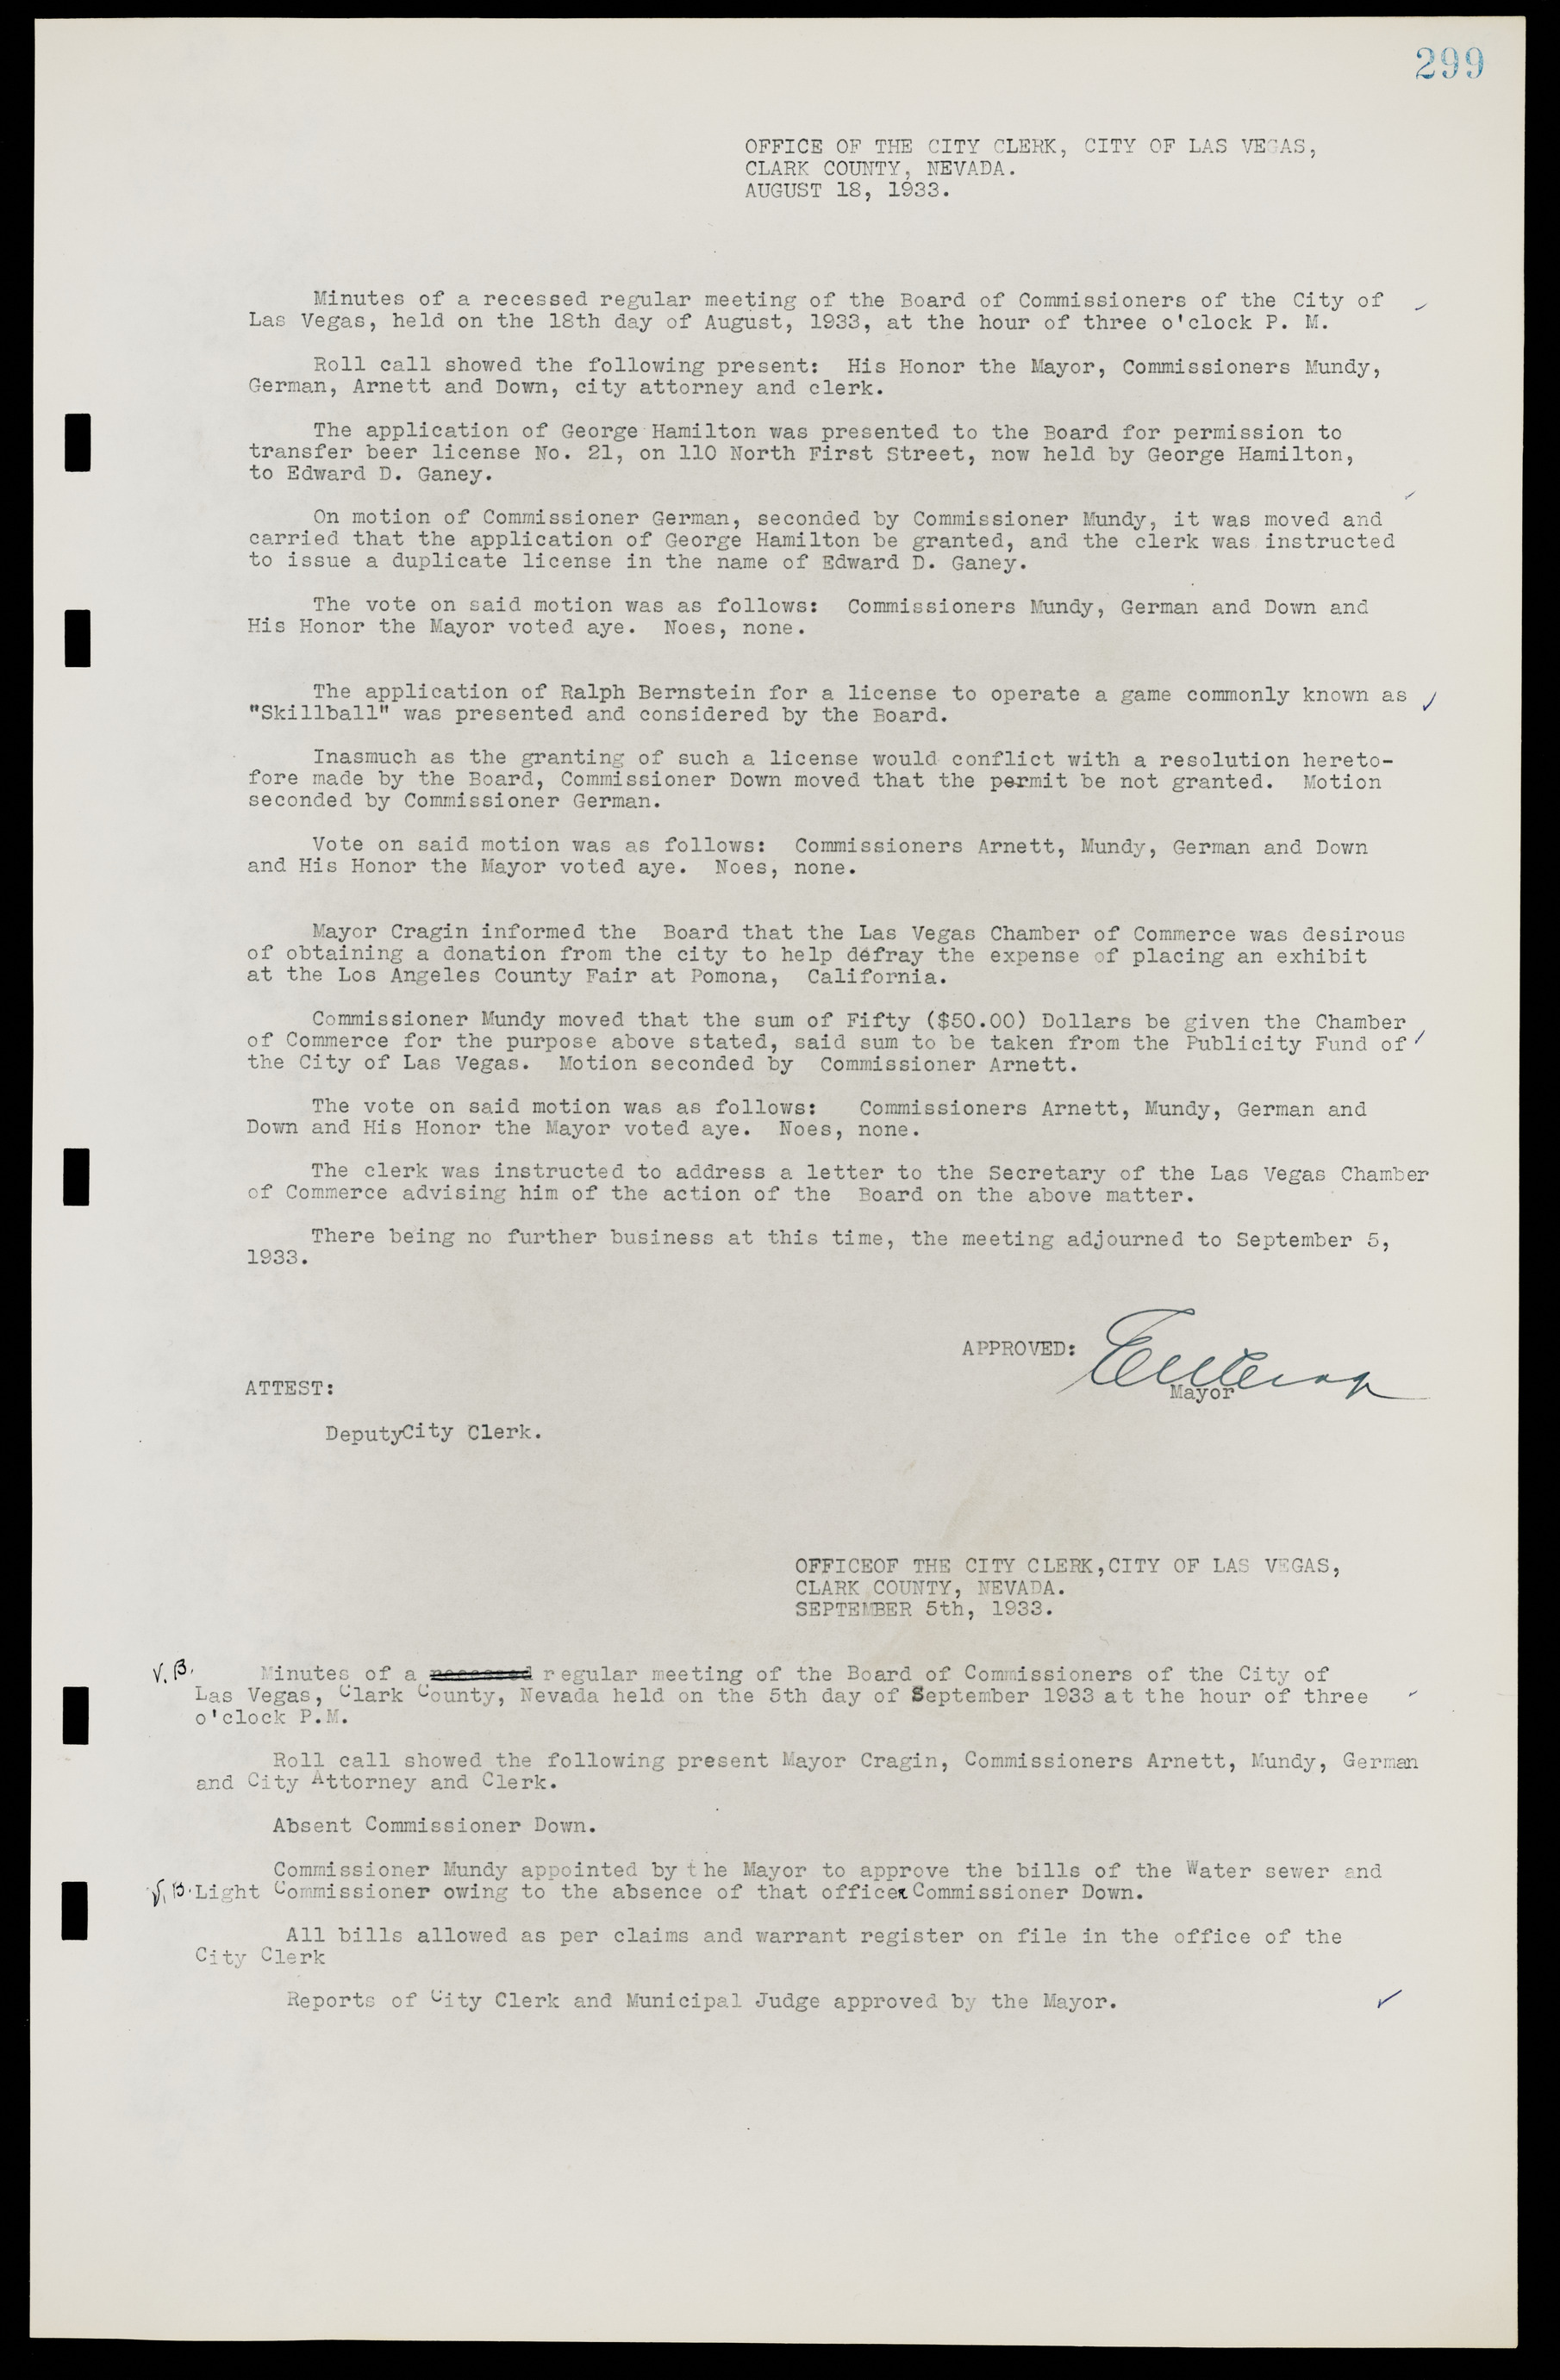 Las Vegas City Commission Minutes, May 14, 1929 to February 11, 1937, lvc000003-306